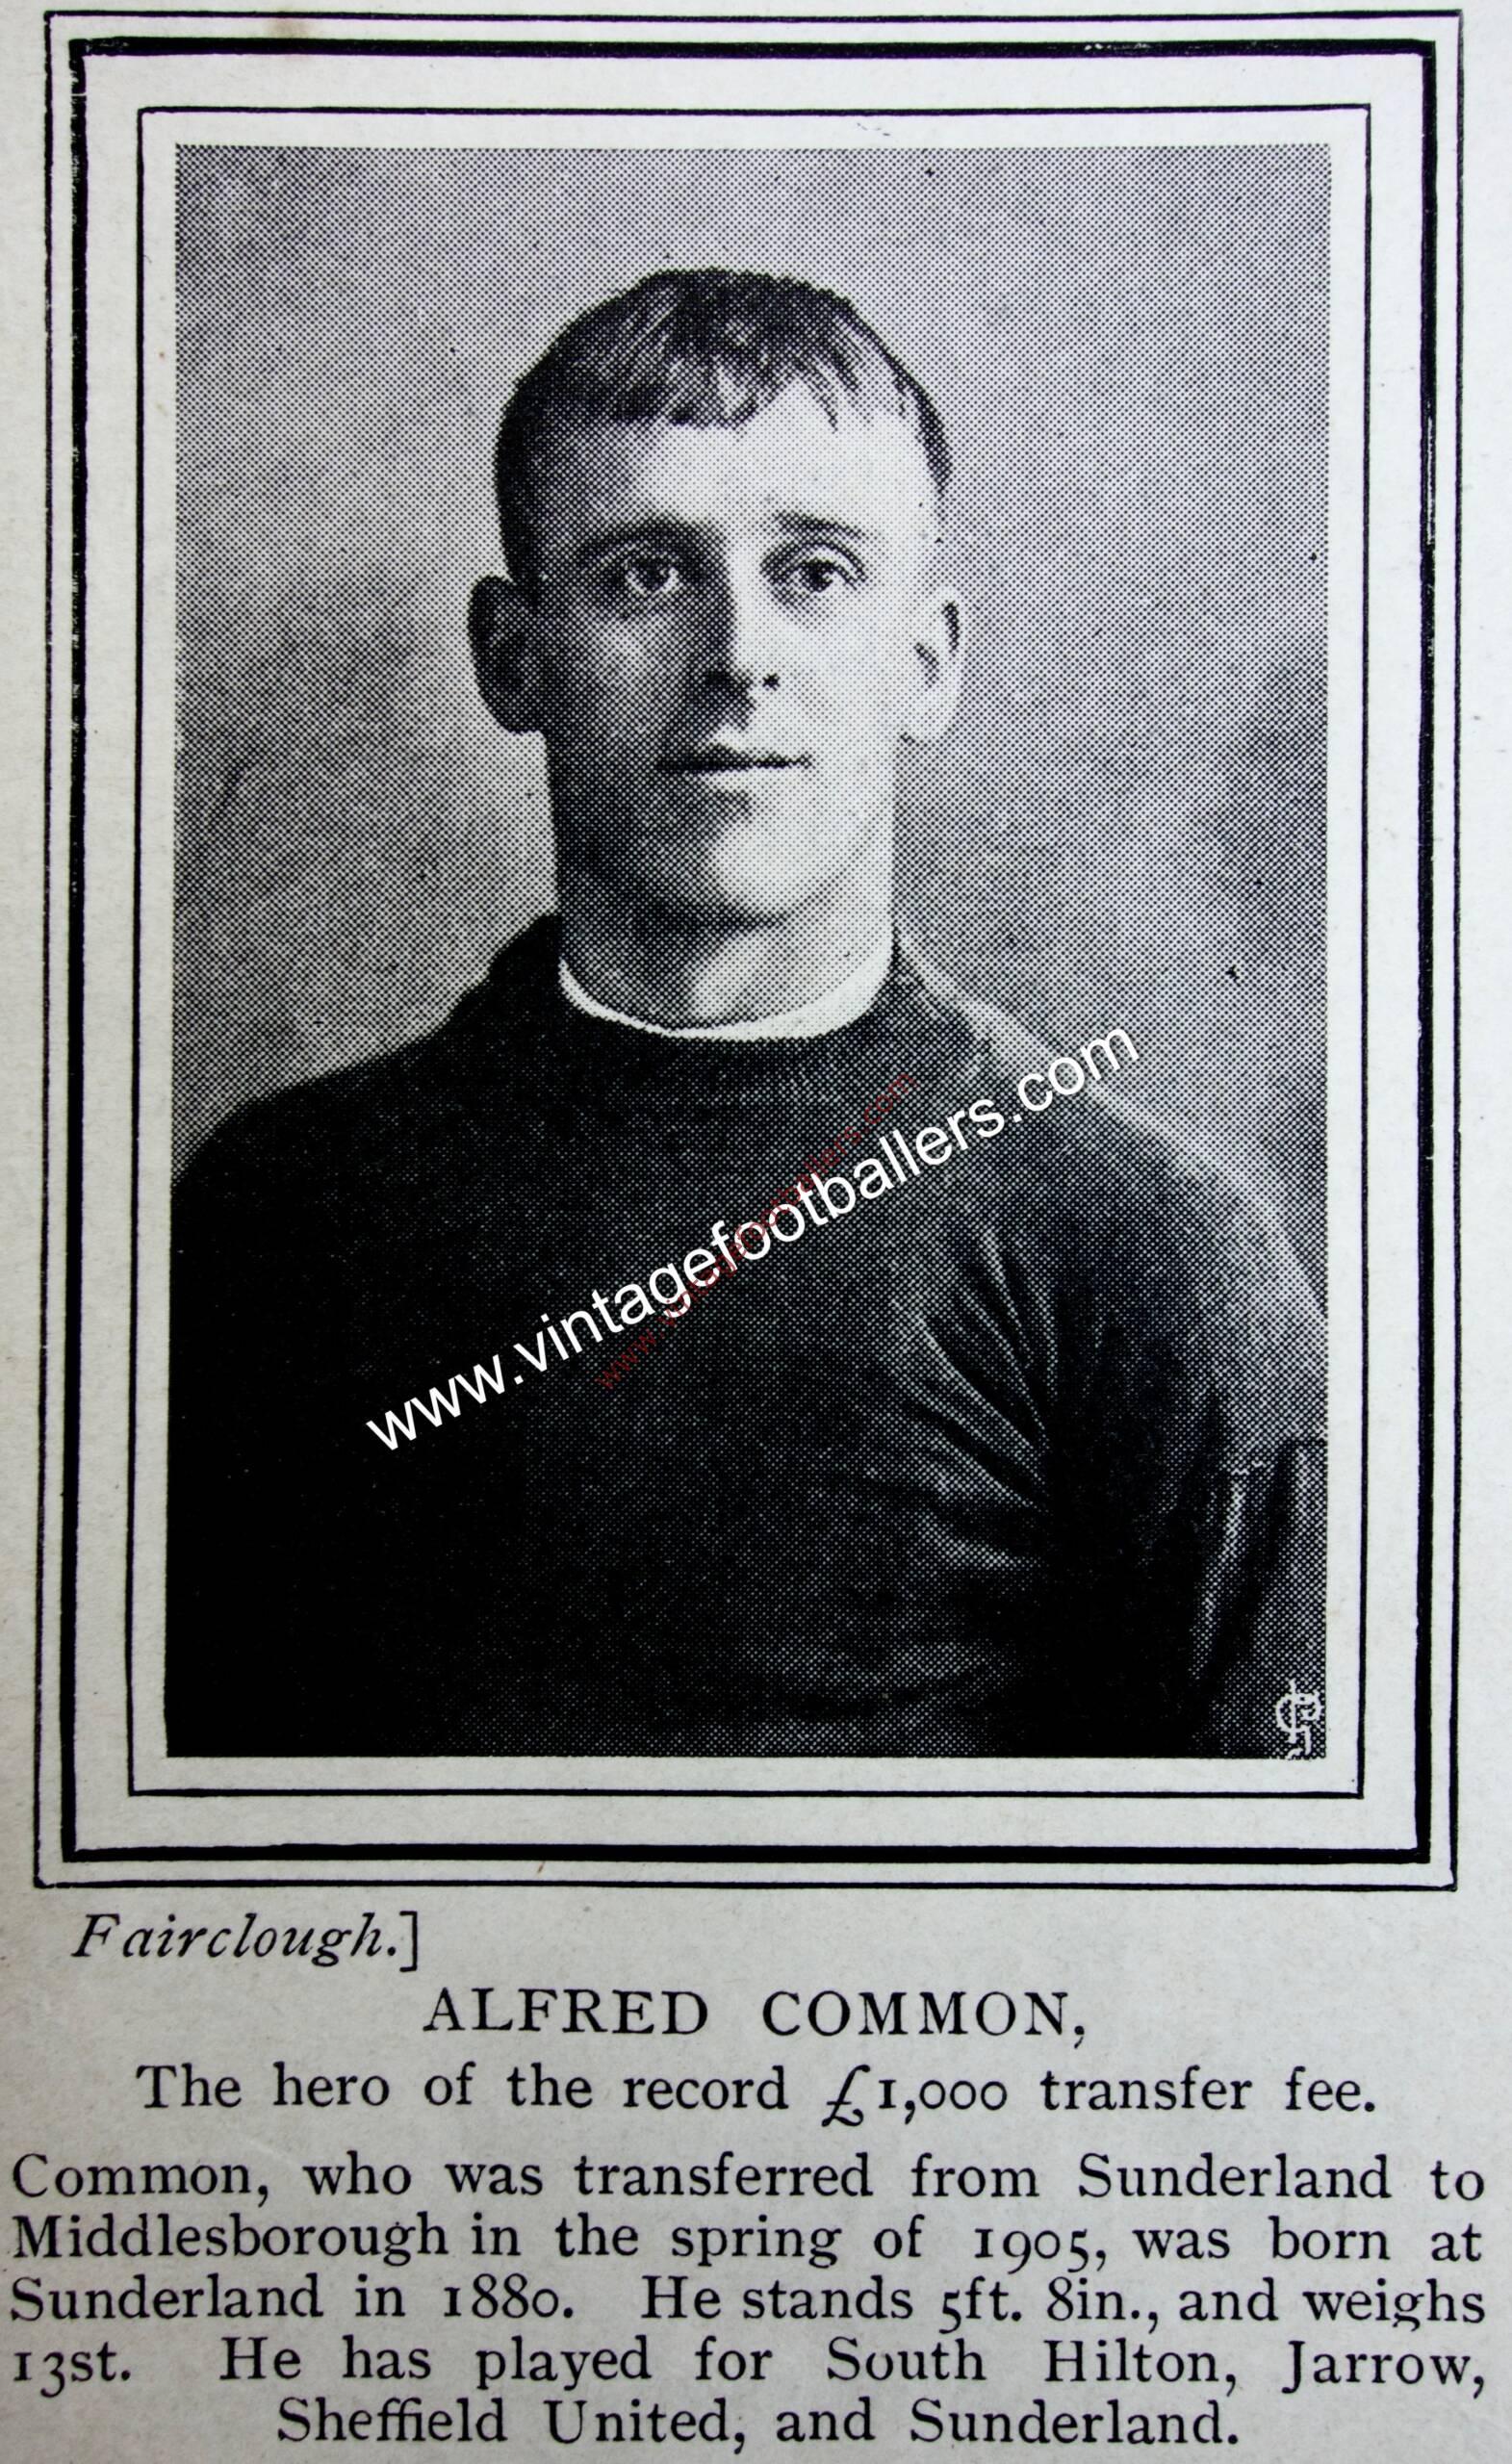 Common Alf Image Middlesbrough 1907, Middlesbrough Transfer News